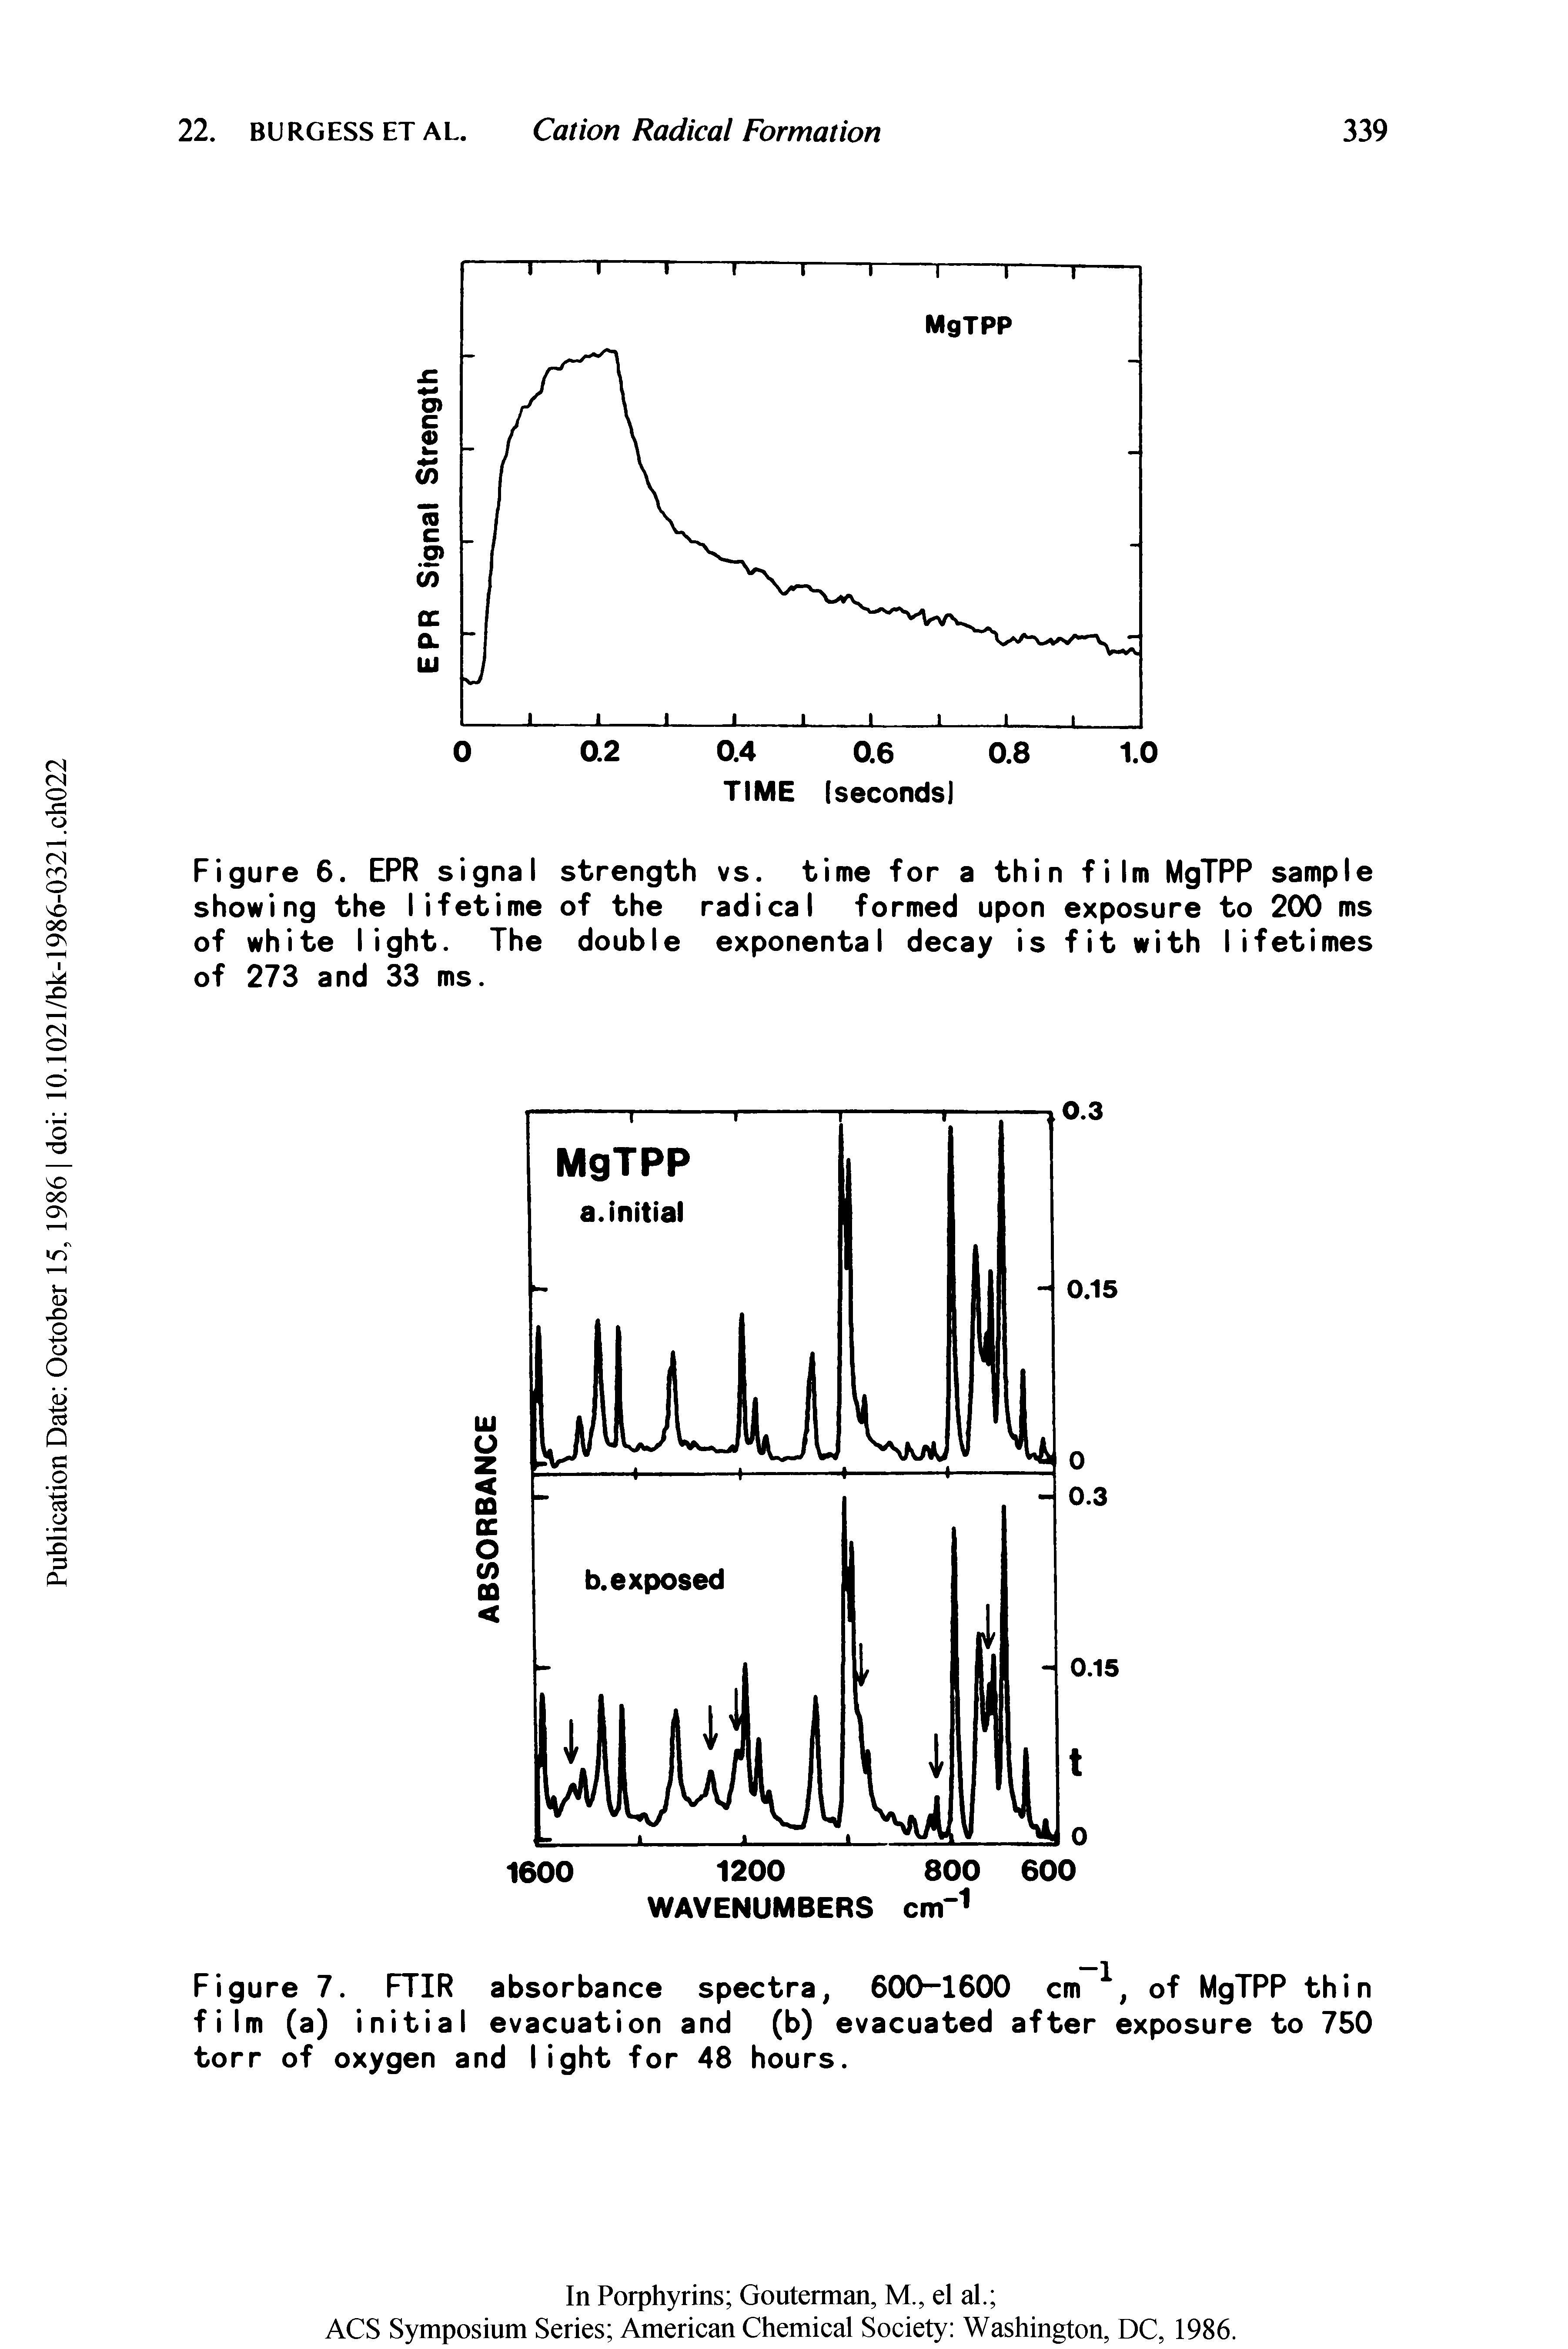 Figure 7. FTIR absorbance spectra, 600-1600 cm of MgTPP thin film (a) initial evacuation and (b) evacuated after exposure to 750 torr of oxygen and light for 48 hours.